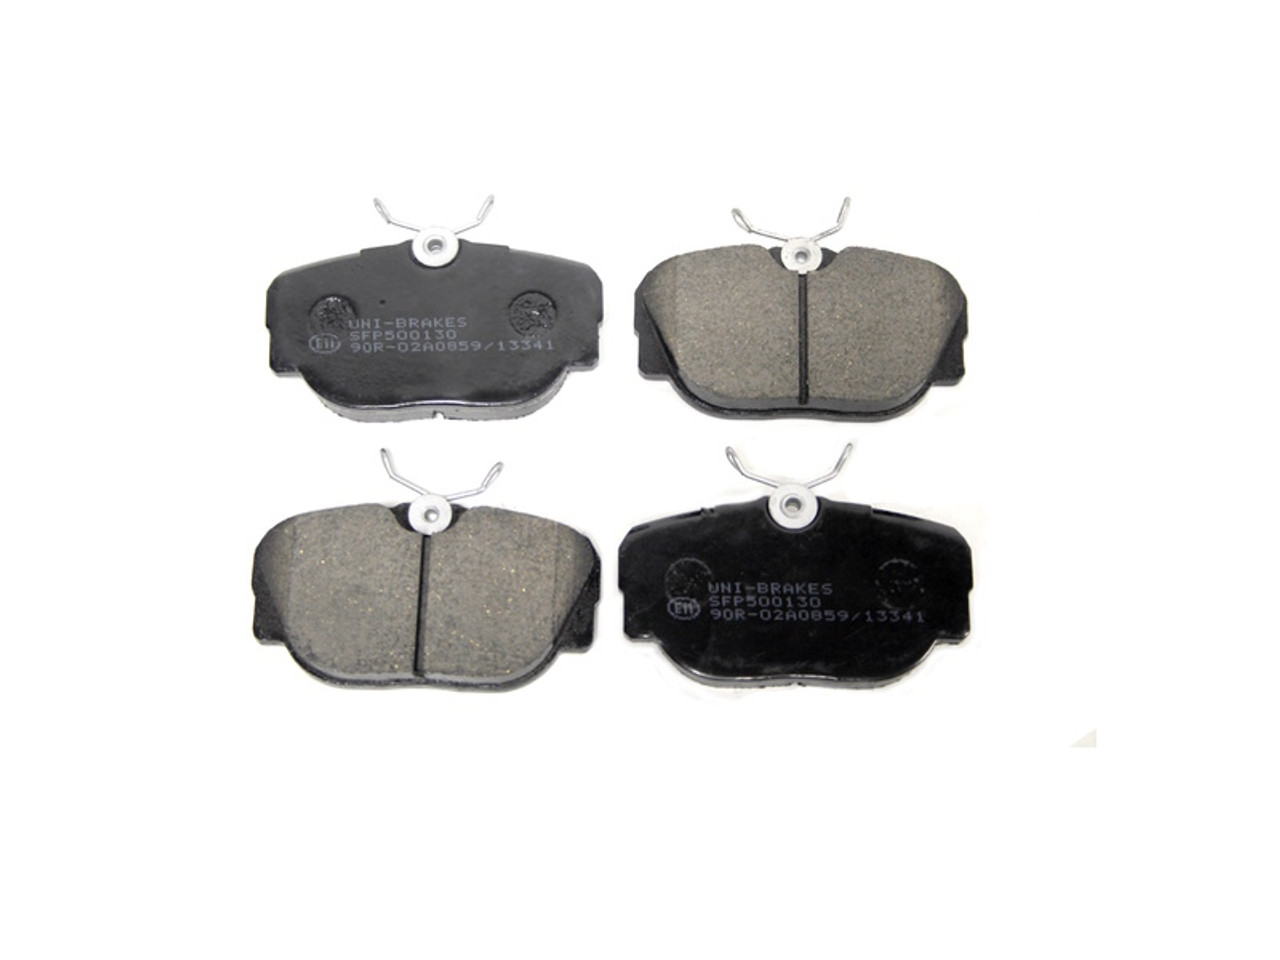 Unibrakes Discovery 2 And Range Rover P38 Rear Brake Pads - SFP500130